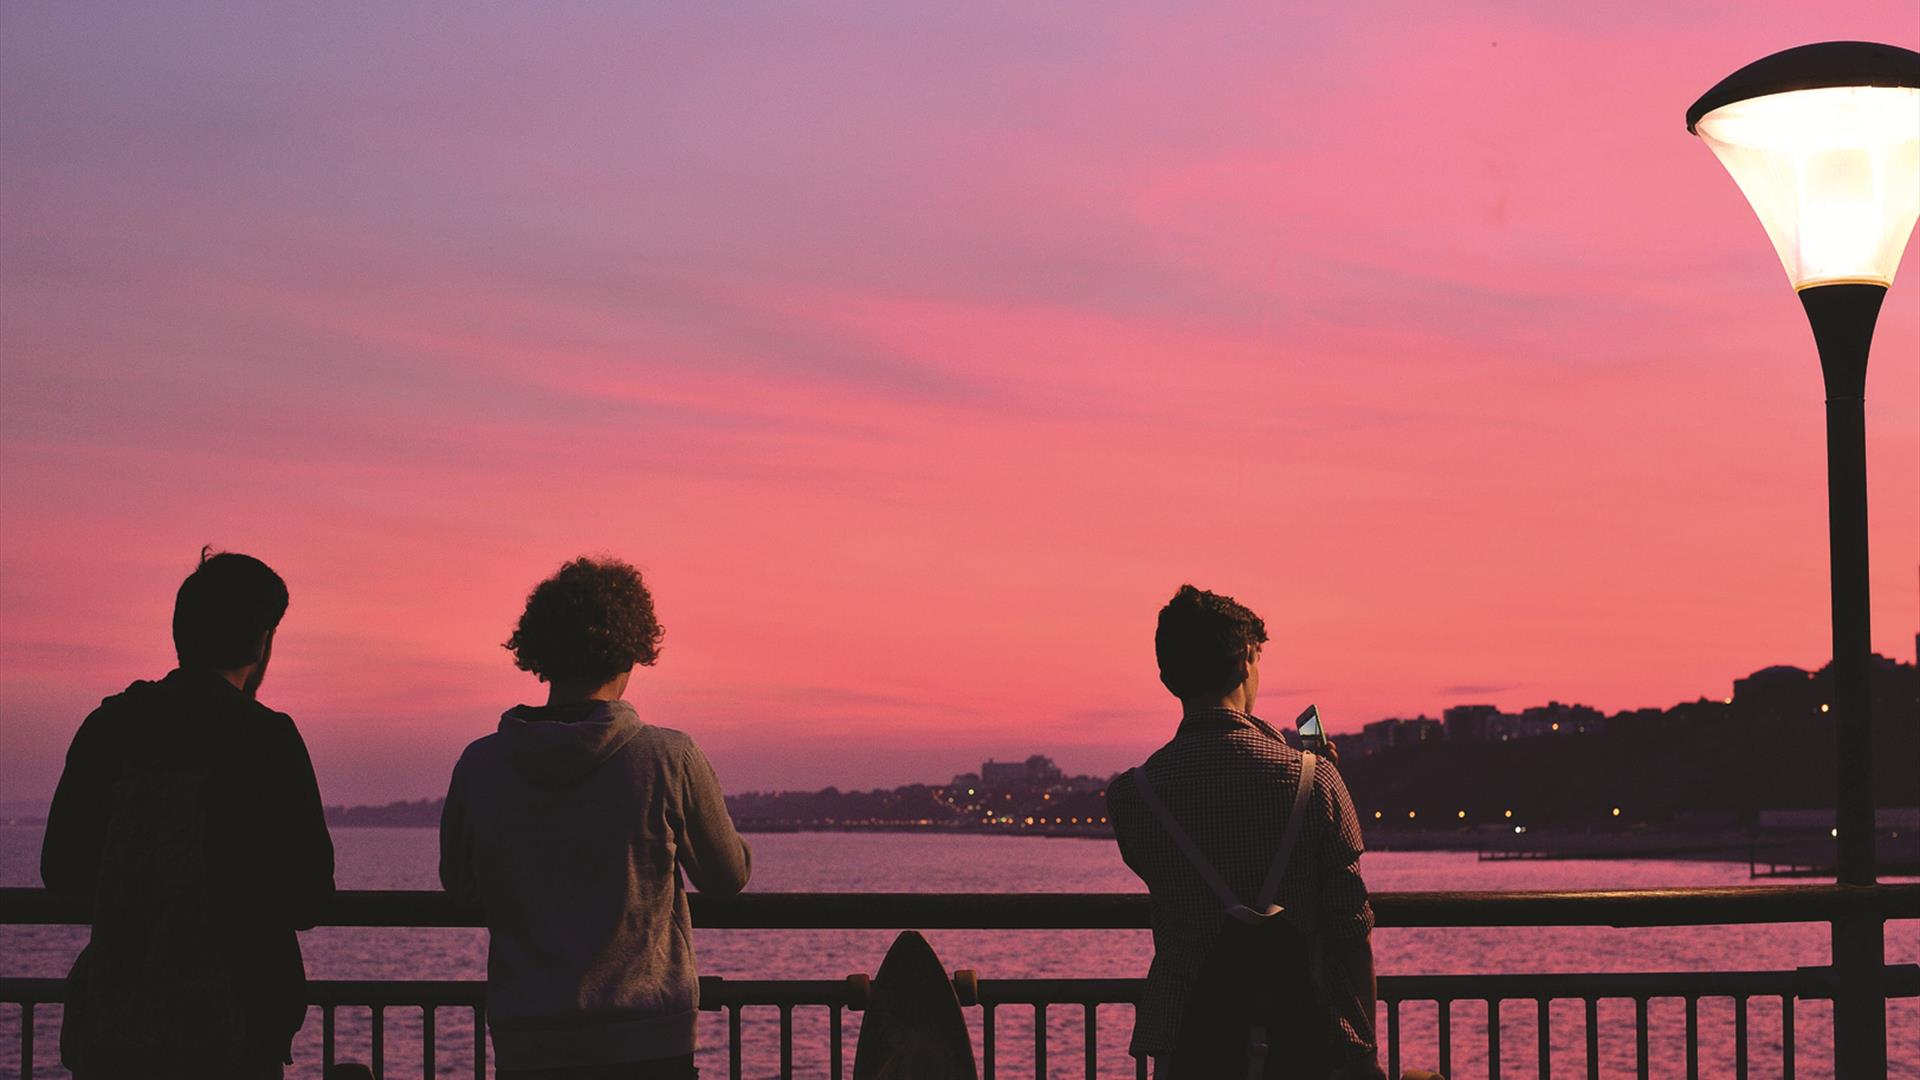 The boys looking at the pink sunset over Bournemout beach